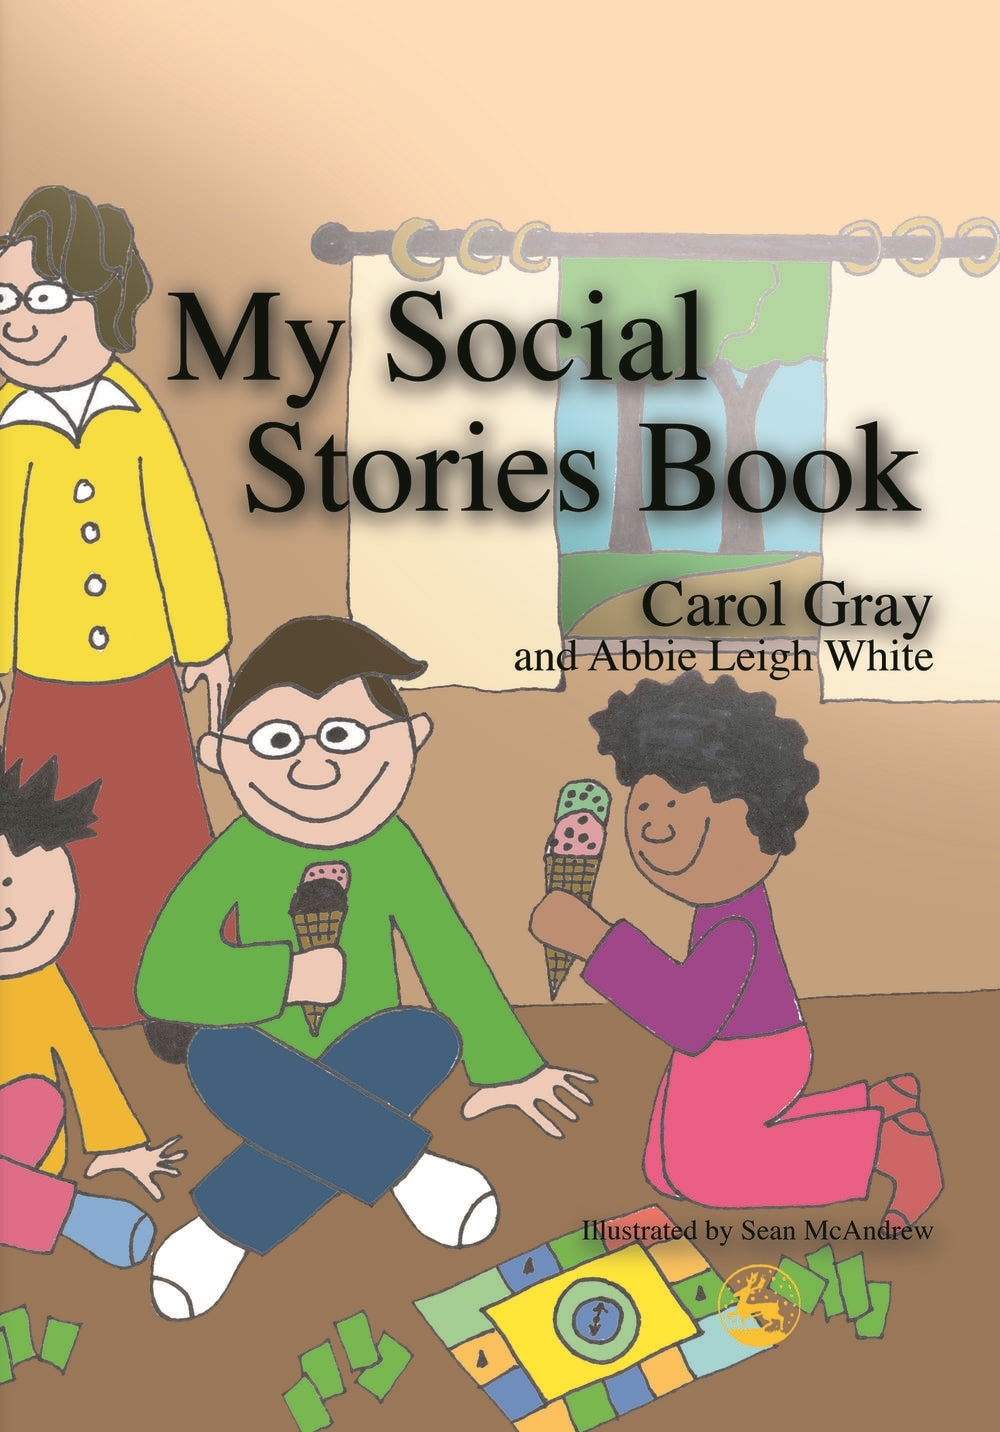 My Social Stories Book by Sean McAndrew, Carol Gray, No Author Listed